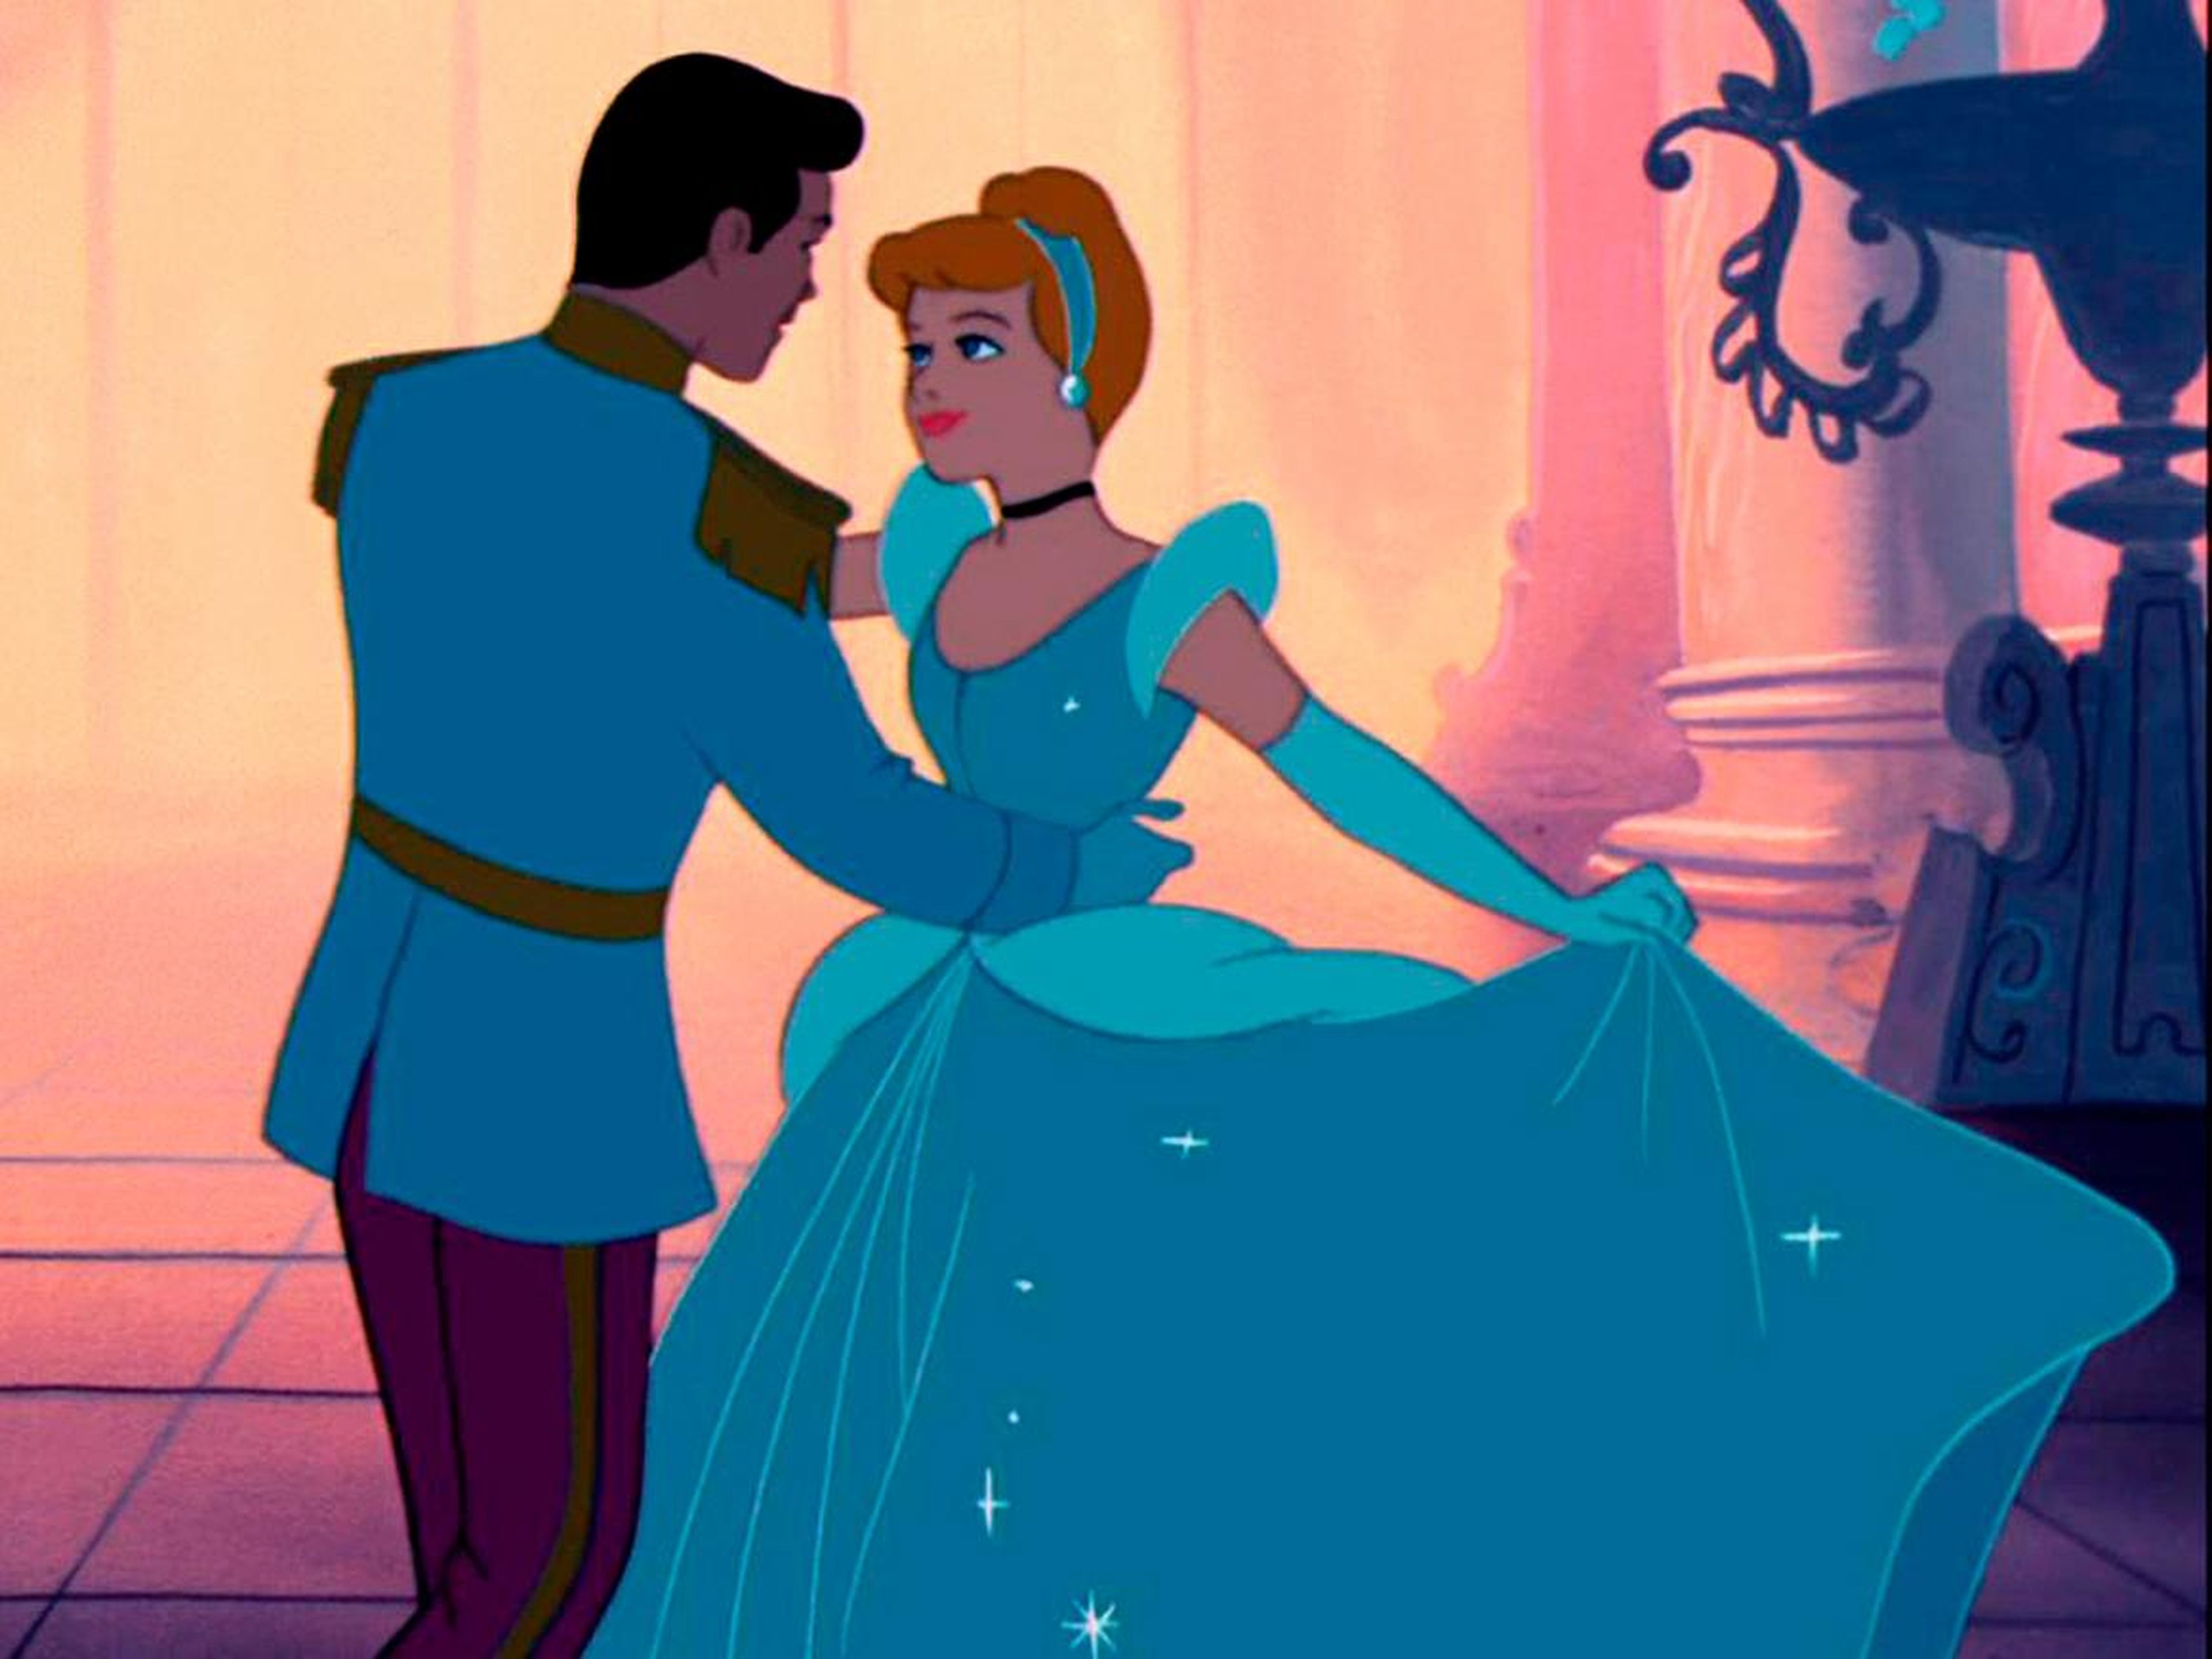 "Cinderella" was first released in 1950.